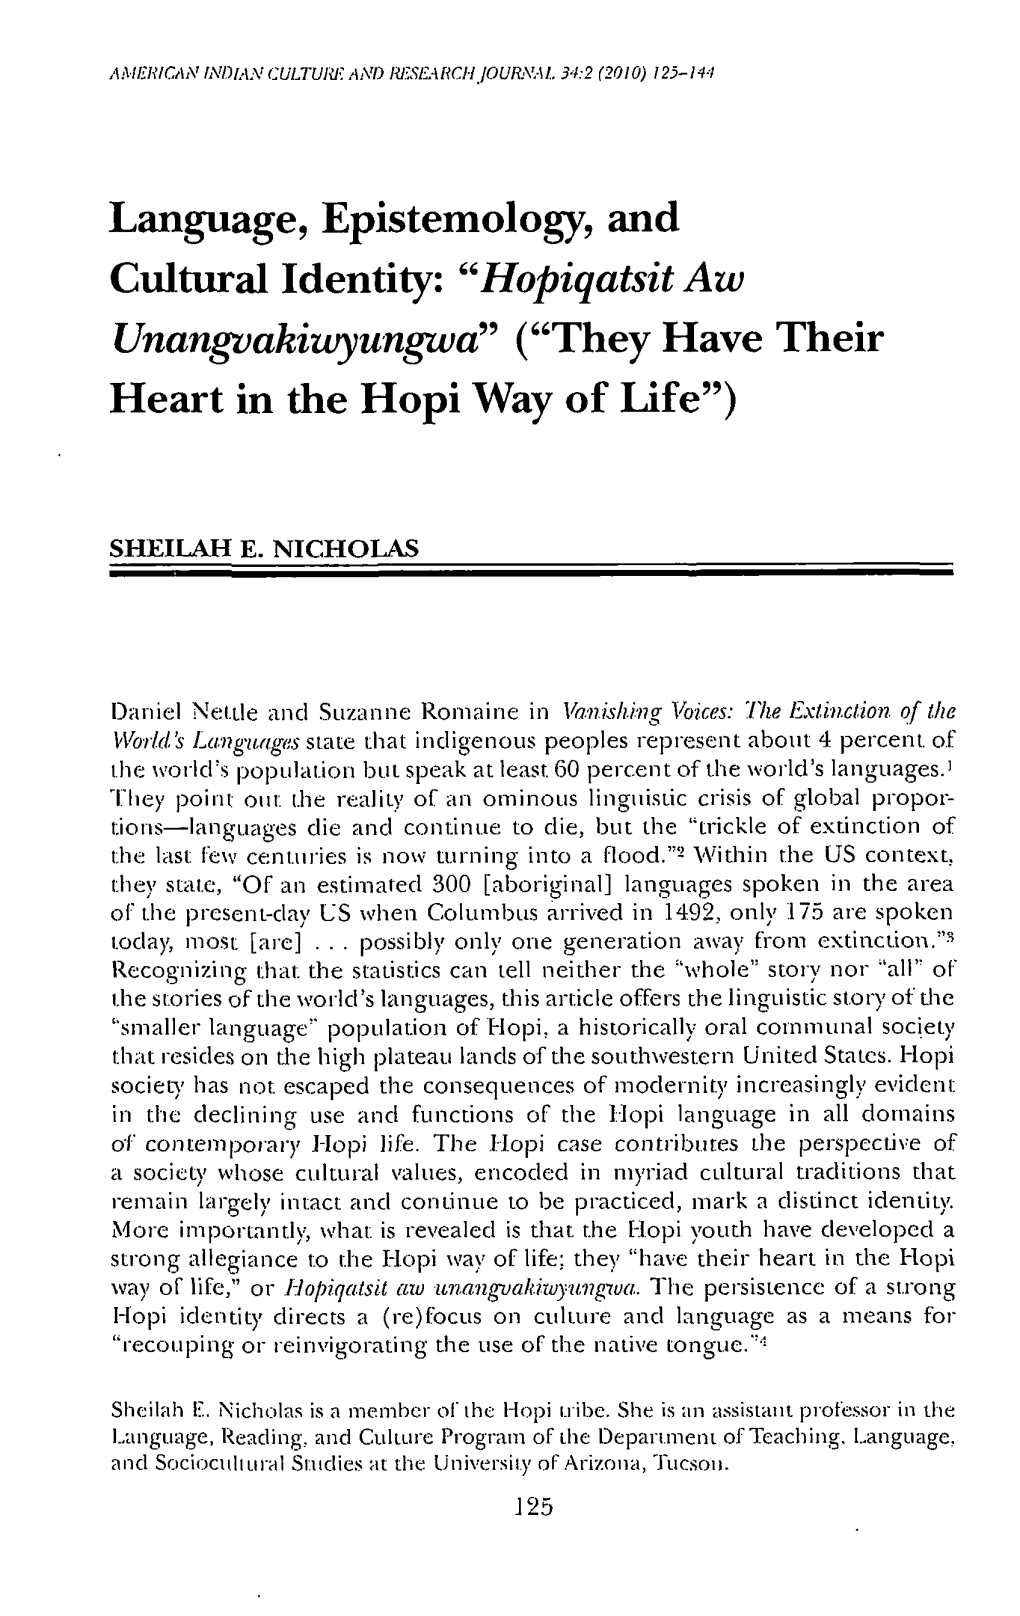 Language, Epistemology, and Cultural Identity: "Hopiqatsit Aw Unangvakiwyungwa" ("They Have Their Heart in the Hopi Way of Life")